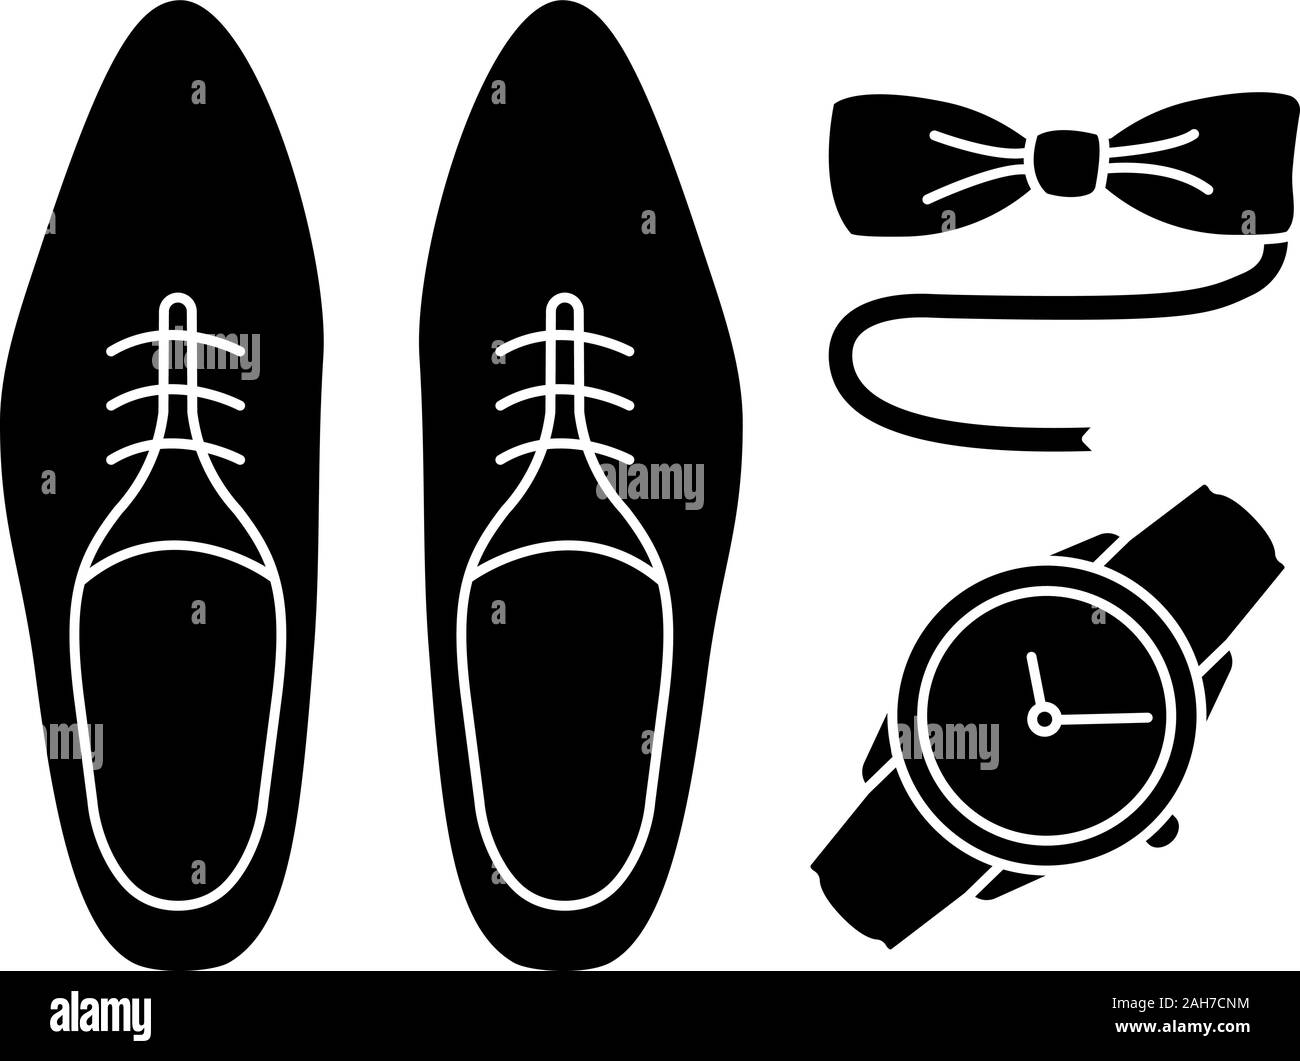 Mens accessories glyph icon. Dress code. Menswear. Men’s style and fashion. Shoes, wristwatch and tuxedo bow tie. Silhouette symbol. Negative space. V Stock Vector